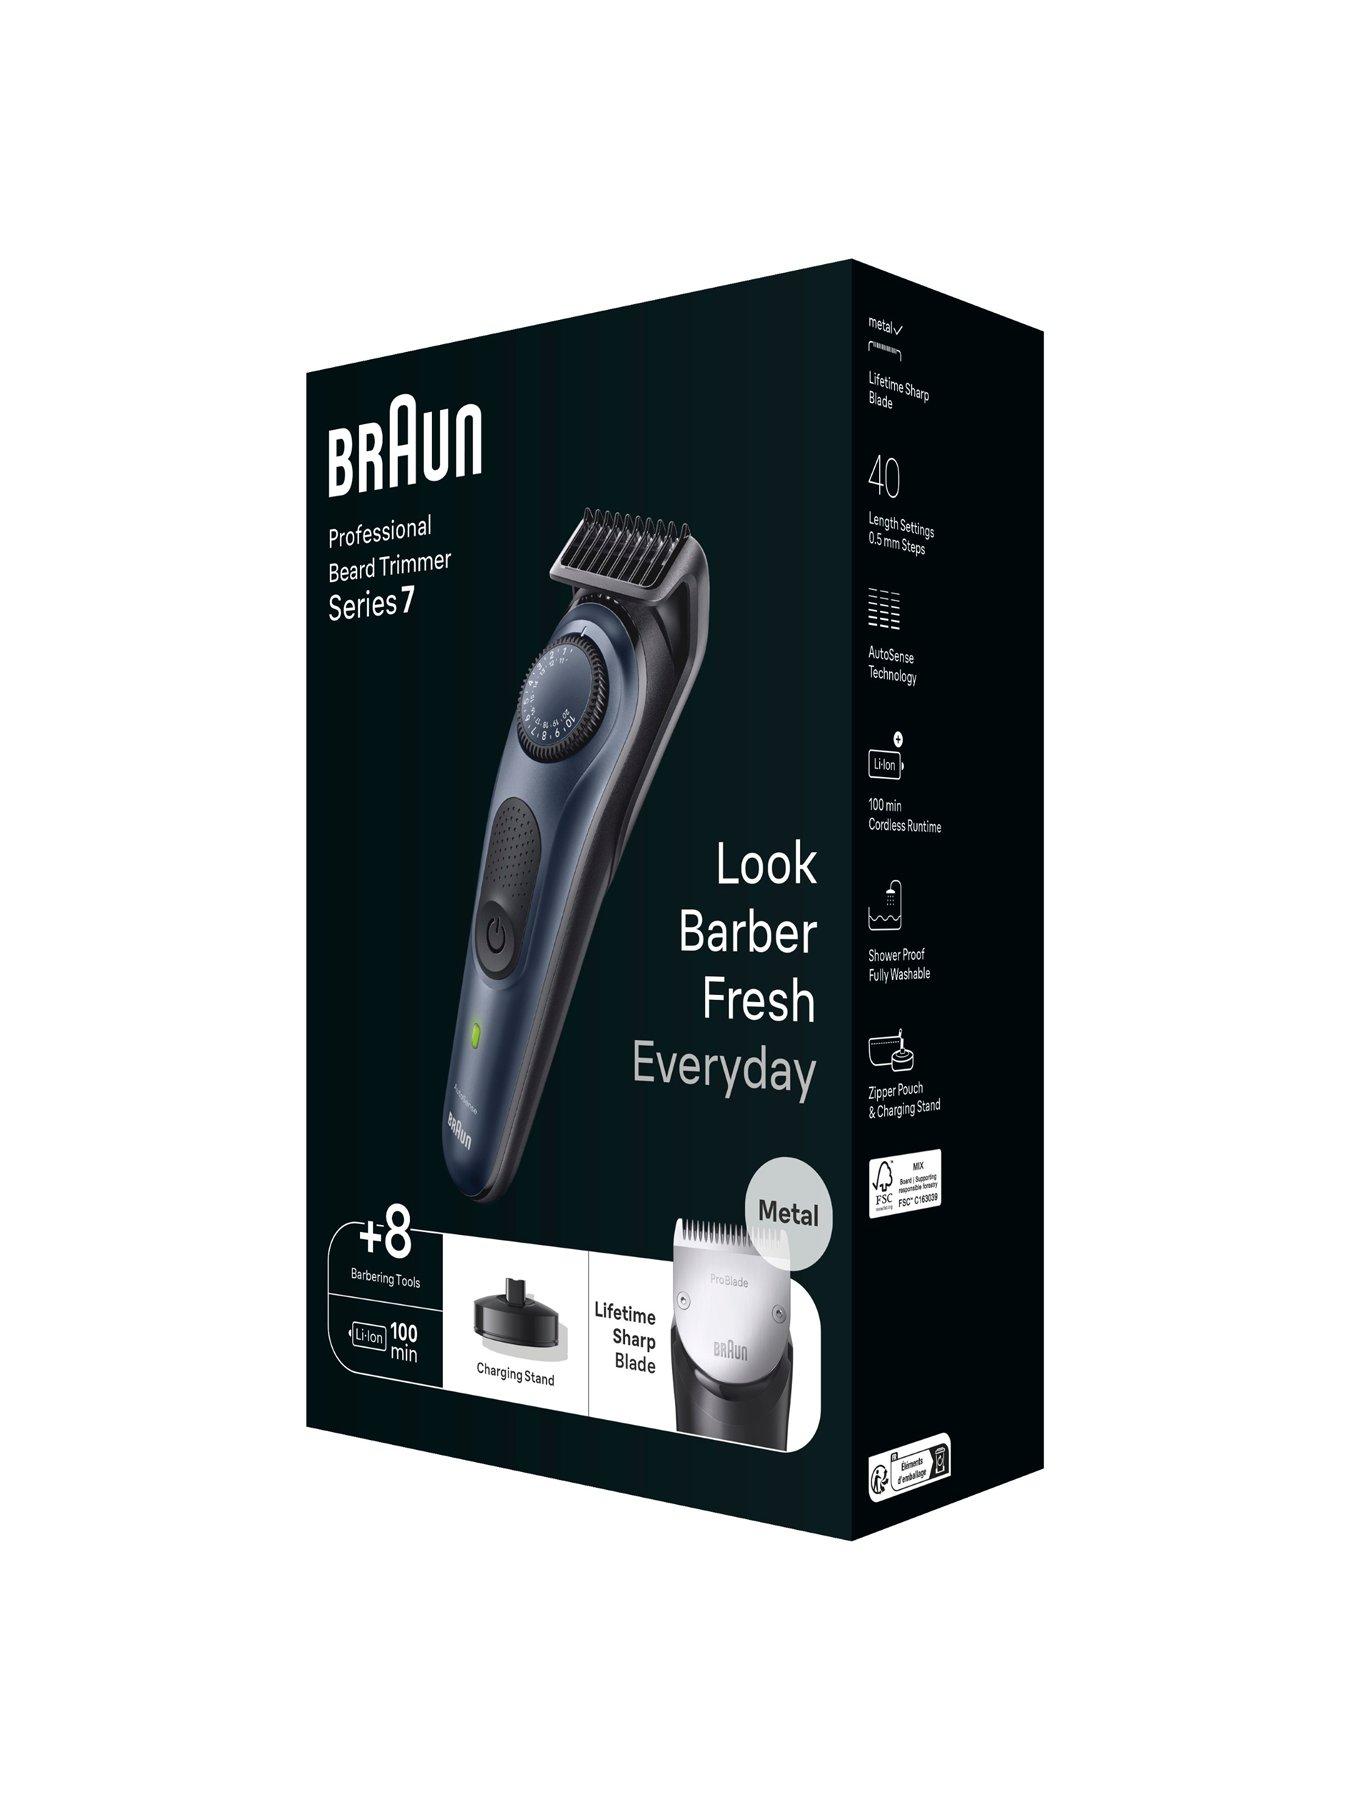 Braun Beard Trimmer Series 7 BT7421, Trimmer With Barber Tools And 100-min  Runtime